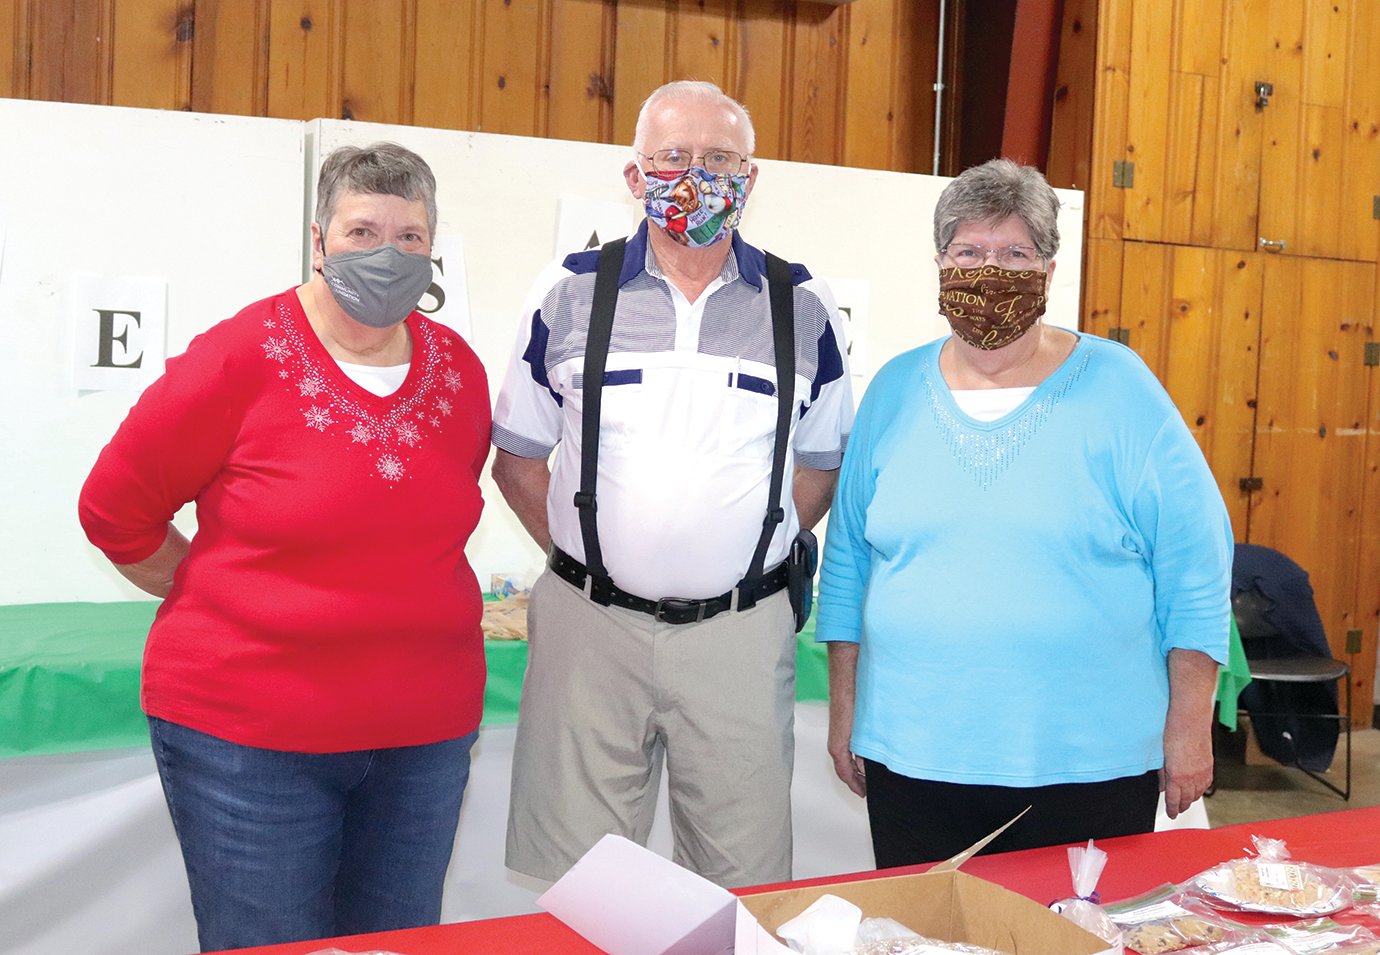 Gloria Oliver, from left, Marvin Swick and Martha Swick volunteer their time at the annual Extension Homemakers Club Holiday Expo at the Fairgrounds Saturday. The trio manned their posts from 9 a.m.-3 p.m., serving baked goods to hundreds of visitors throughout the day.